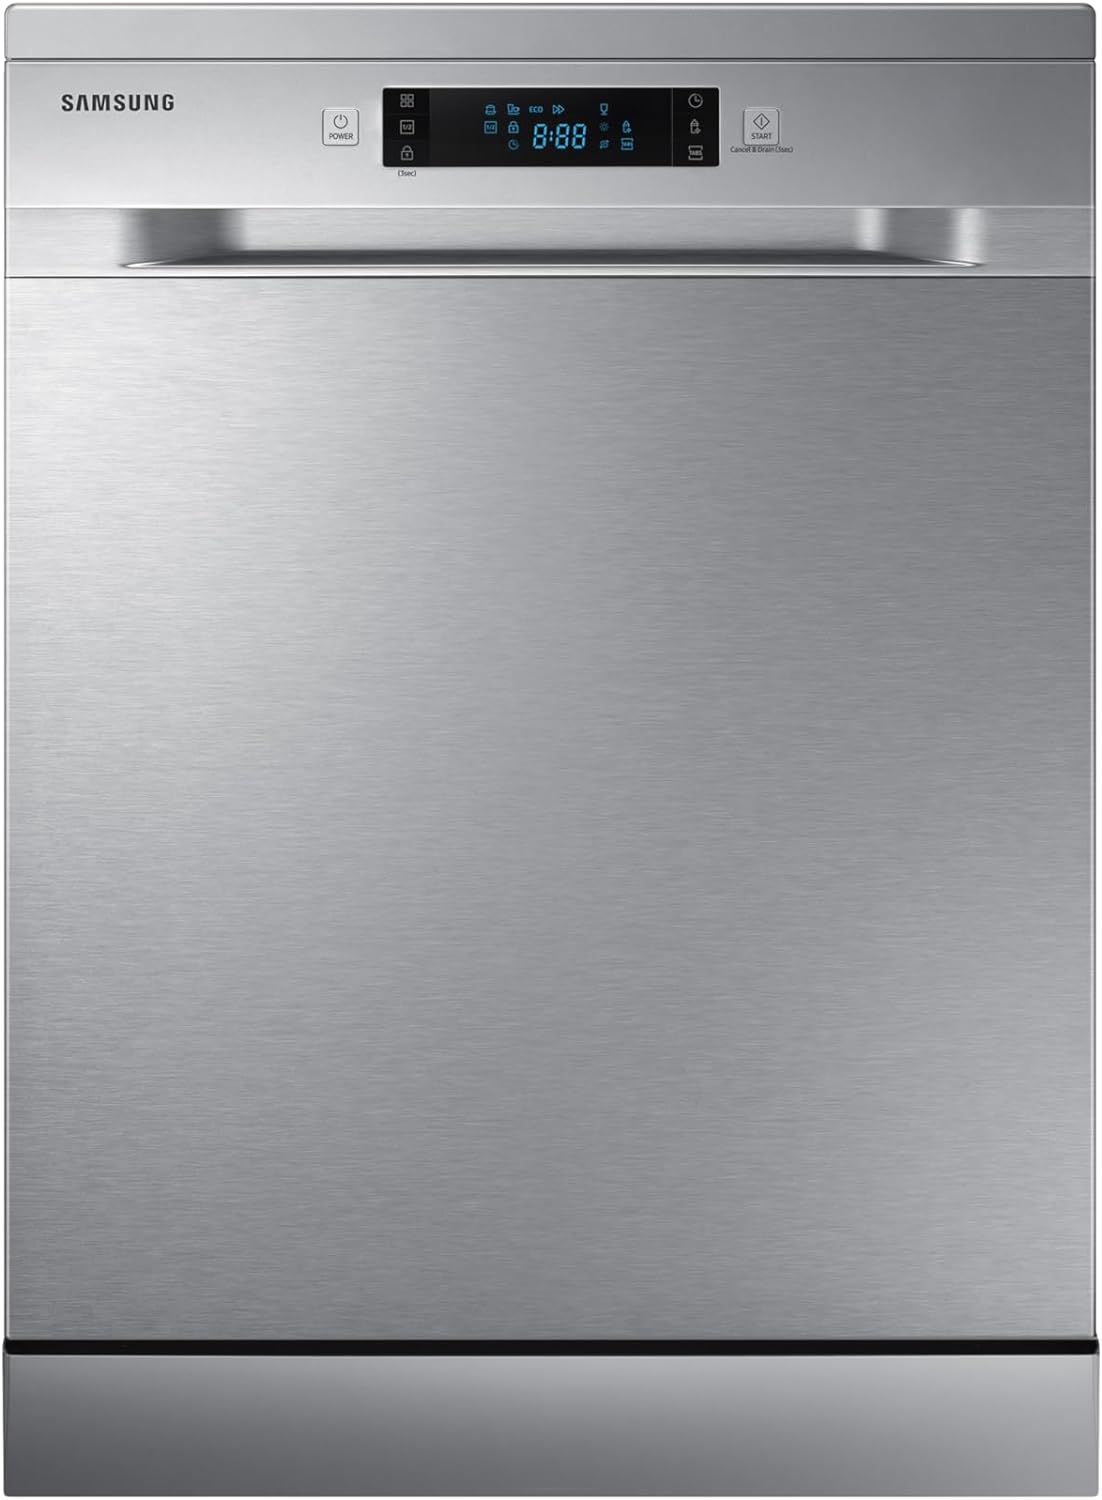 Samsung DW60M5050FS/EU Series 5 Dishwasher, Freestanding, Full Size, 13 Place Settings - Amazing Gadgets Outlet